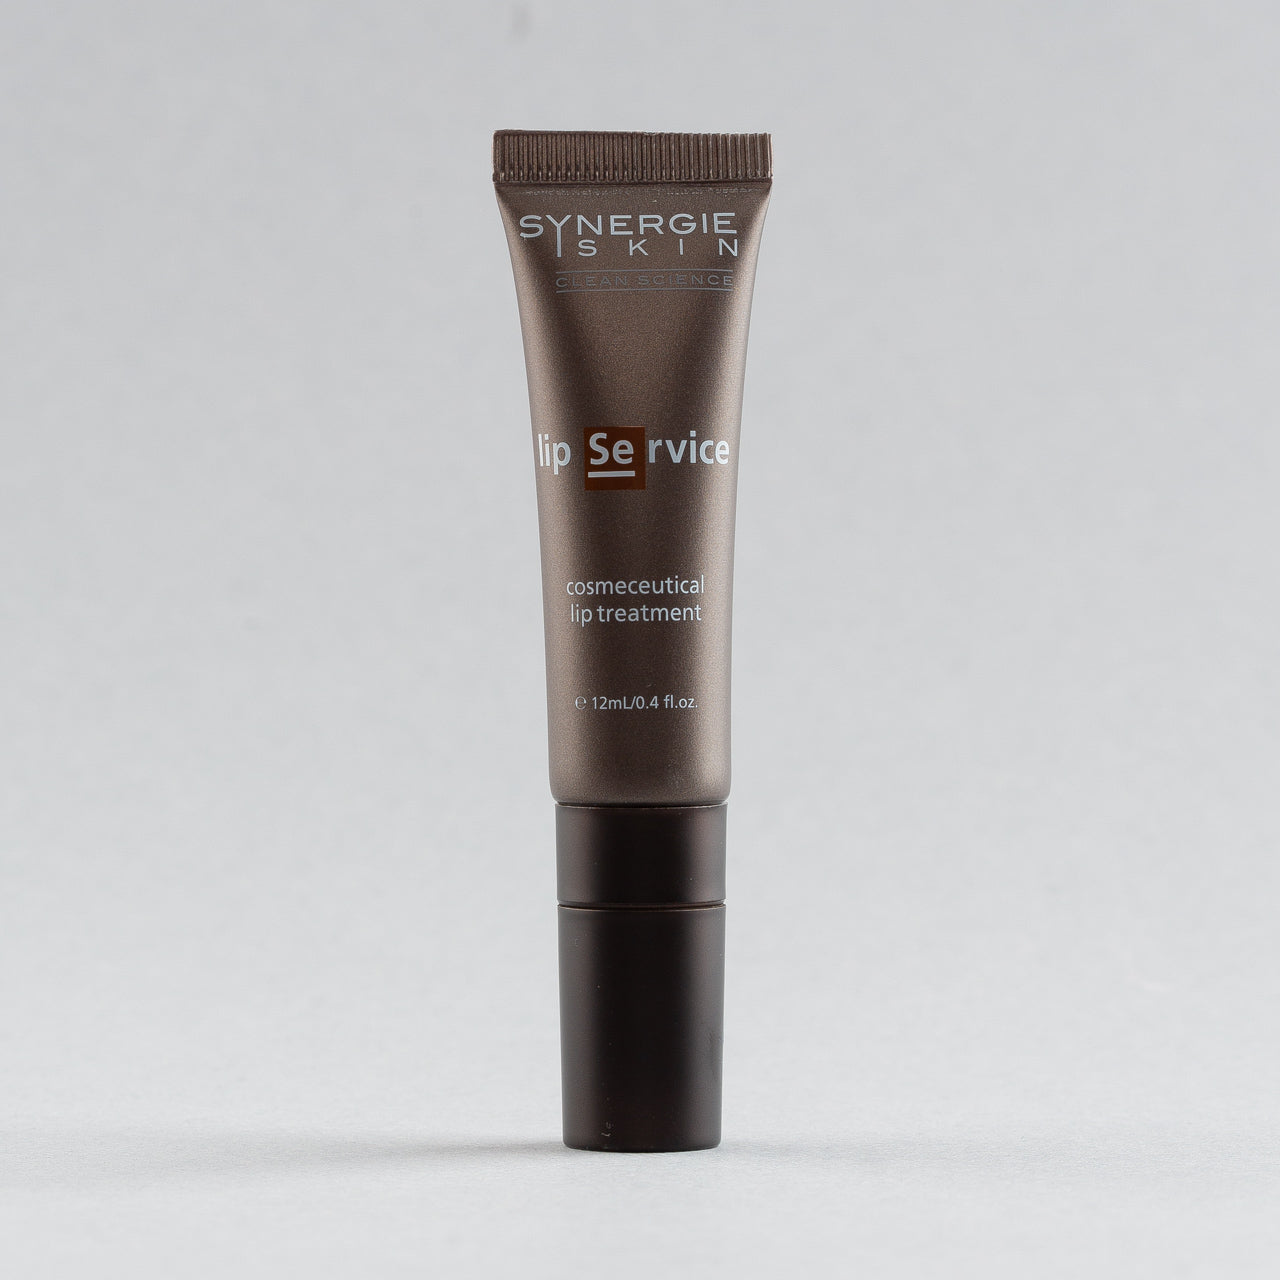 Synergie Skin Lipservice Balm for soft, plump lips